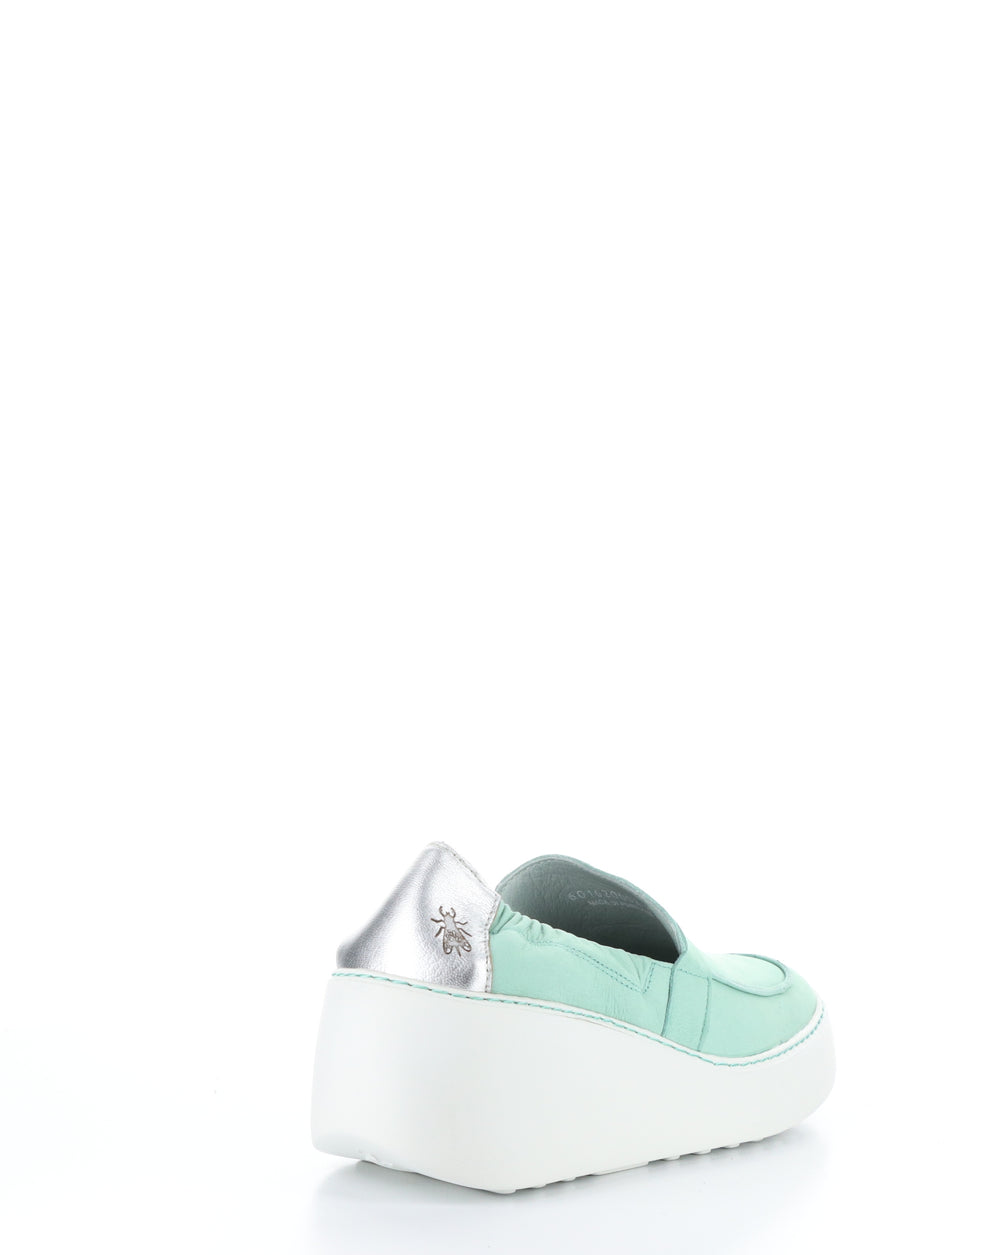 DULI620FLY Green Elasticated Shoes